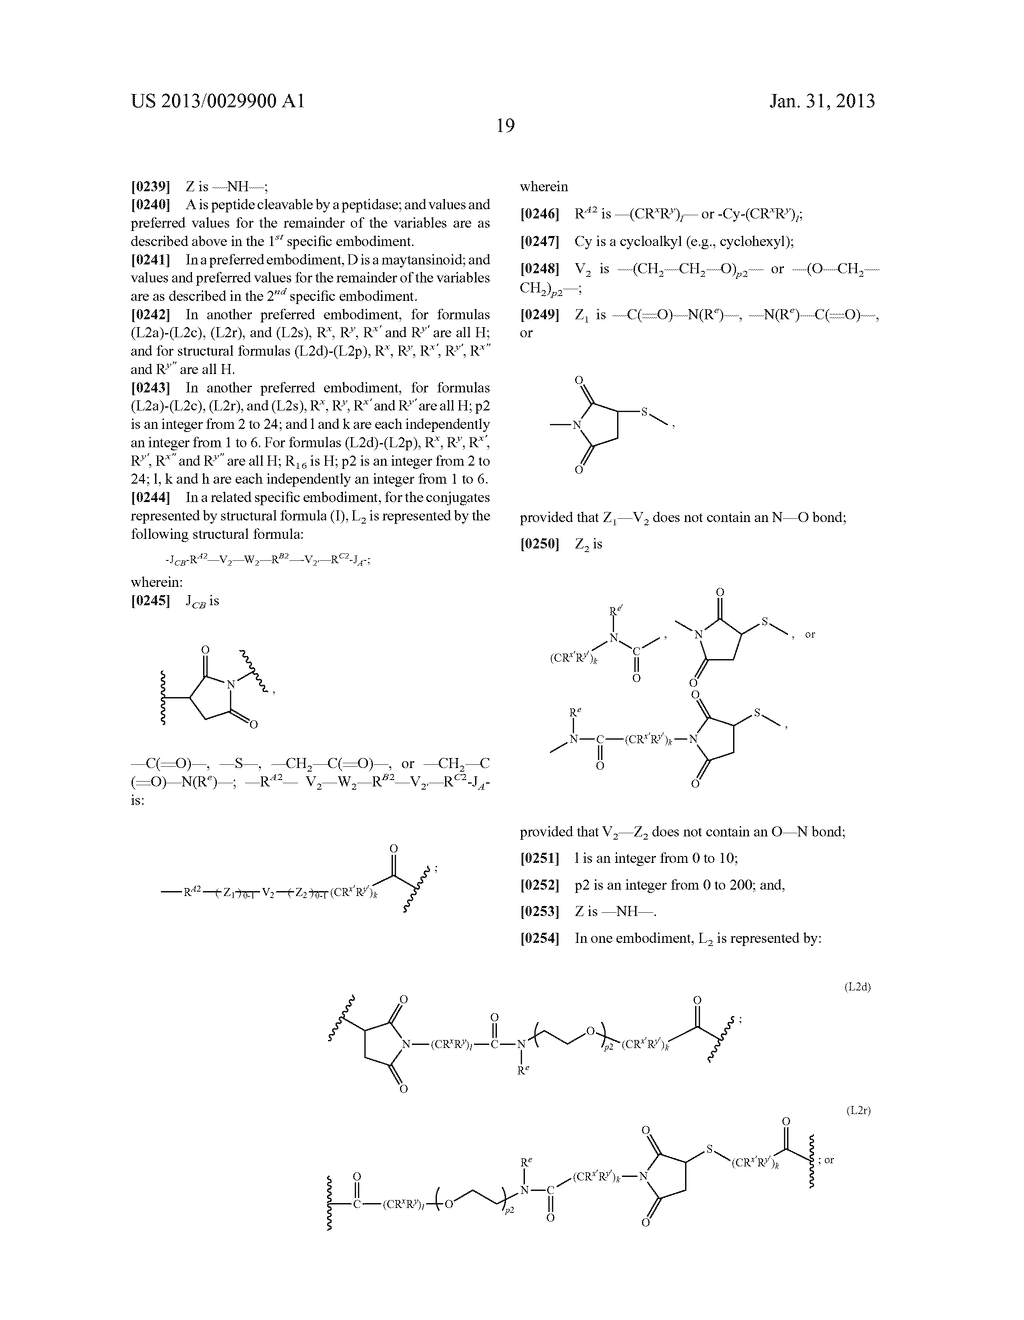 NOVEL MAYTANSINOID DERIVATIVES WITH PEPTIDE LINKER AND CONJUGATES THEREOF - diagram, schematic, and image 52